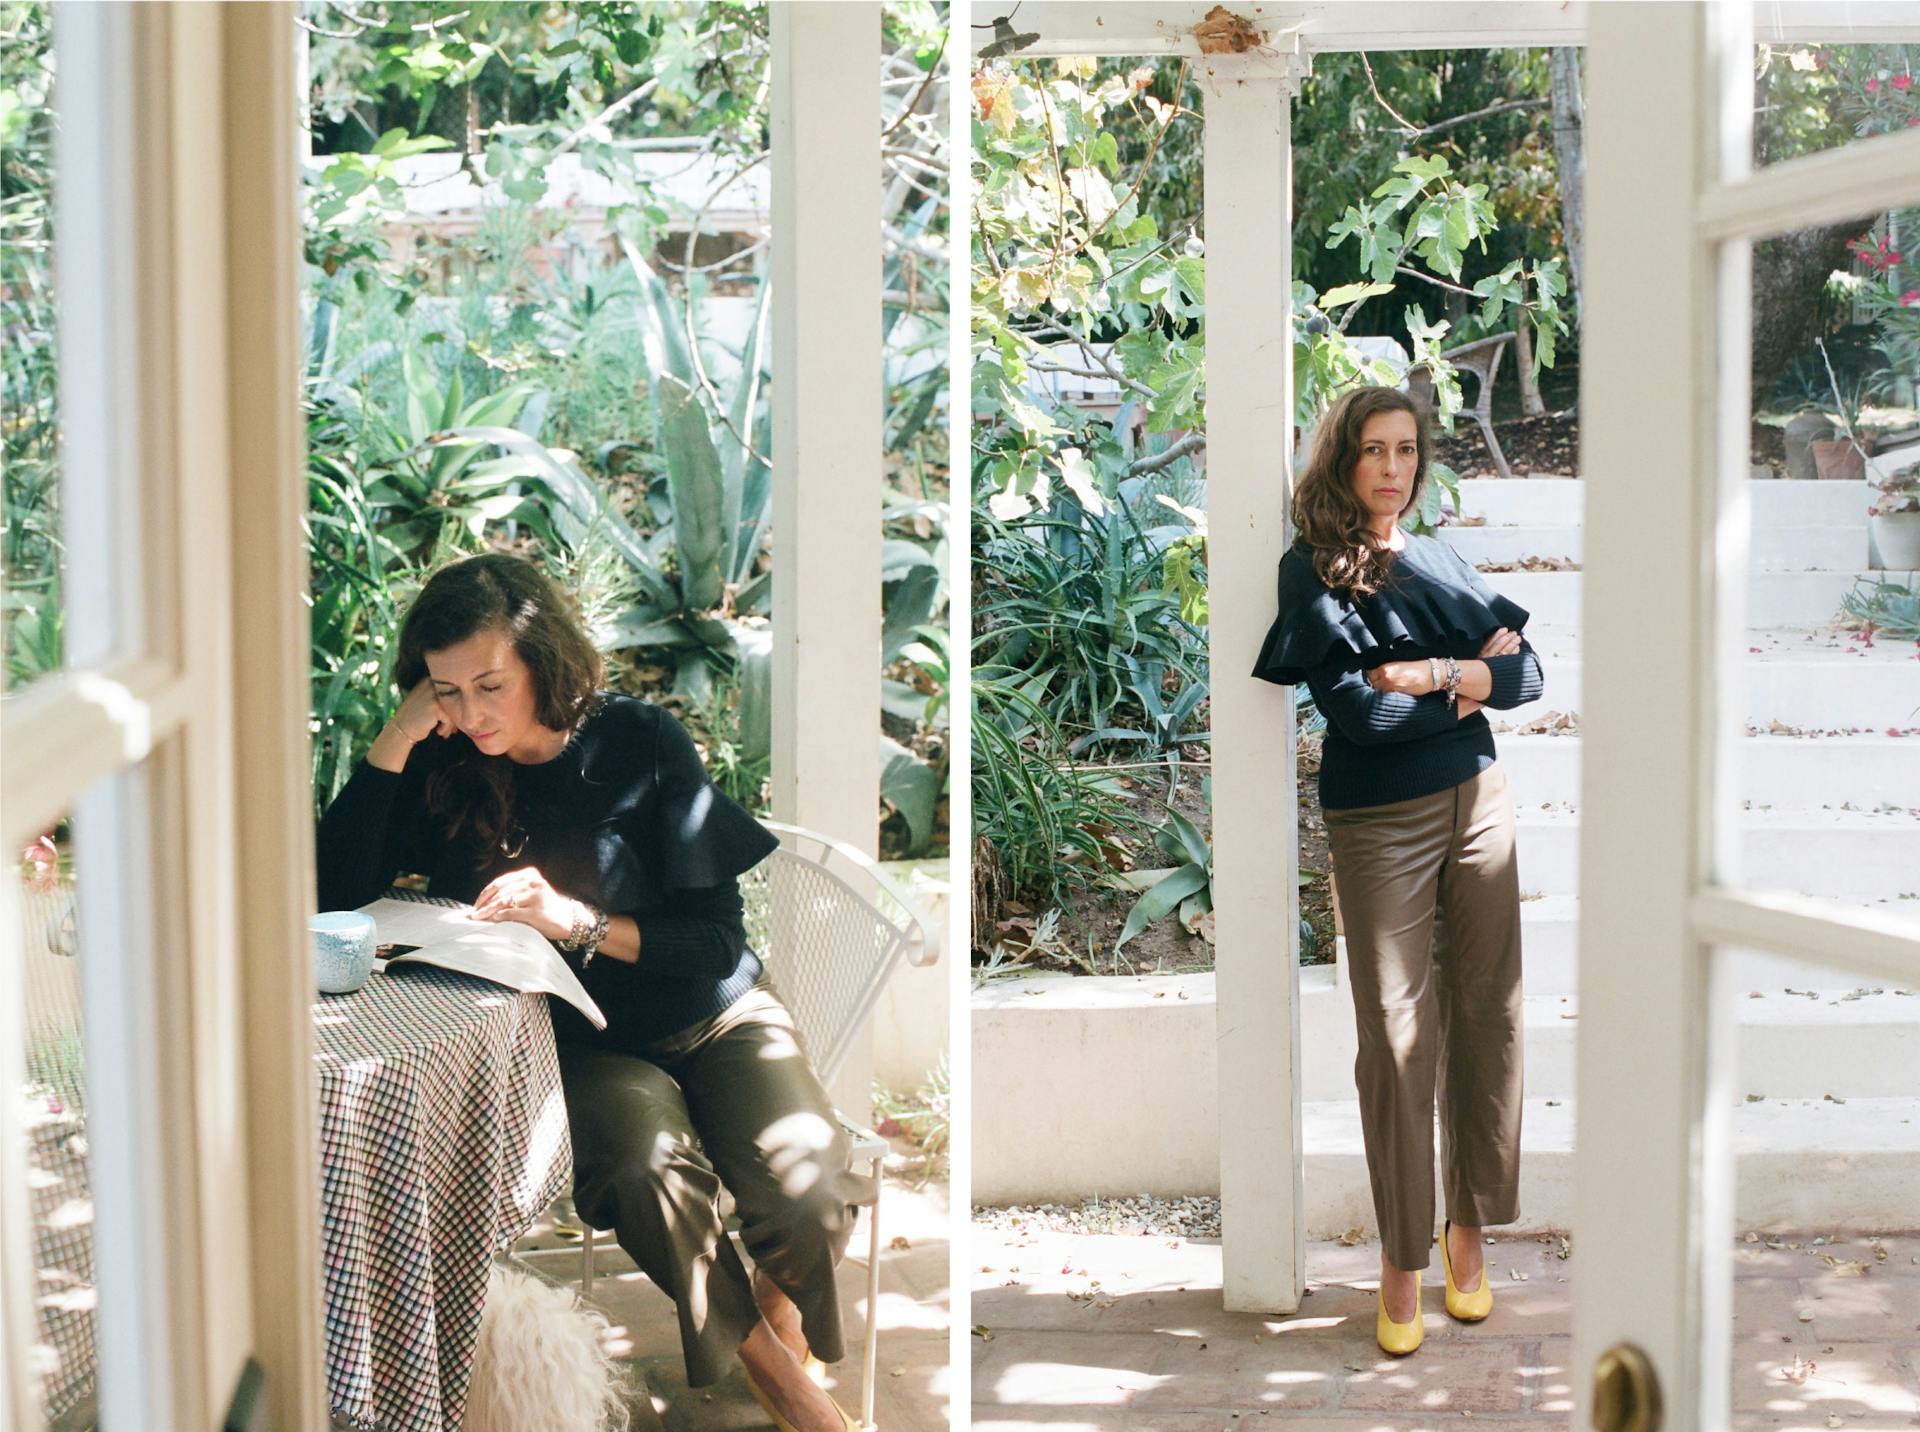 Two images of Clare Vivier wearing a dark outfit. In the first she is sitting down reading a book. In the second she is standing and leaning against a door.